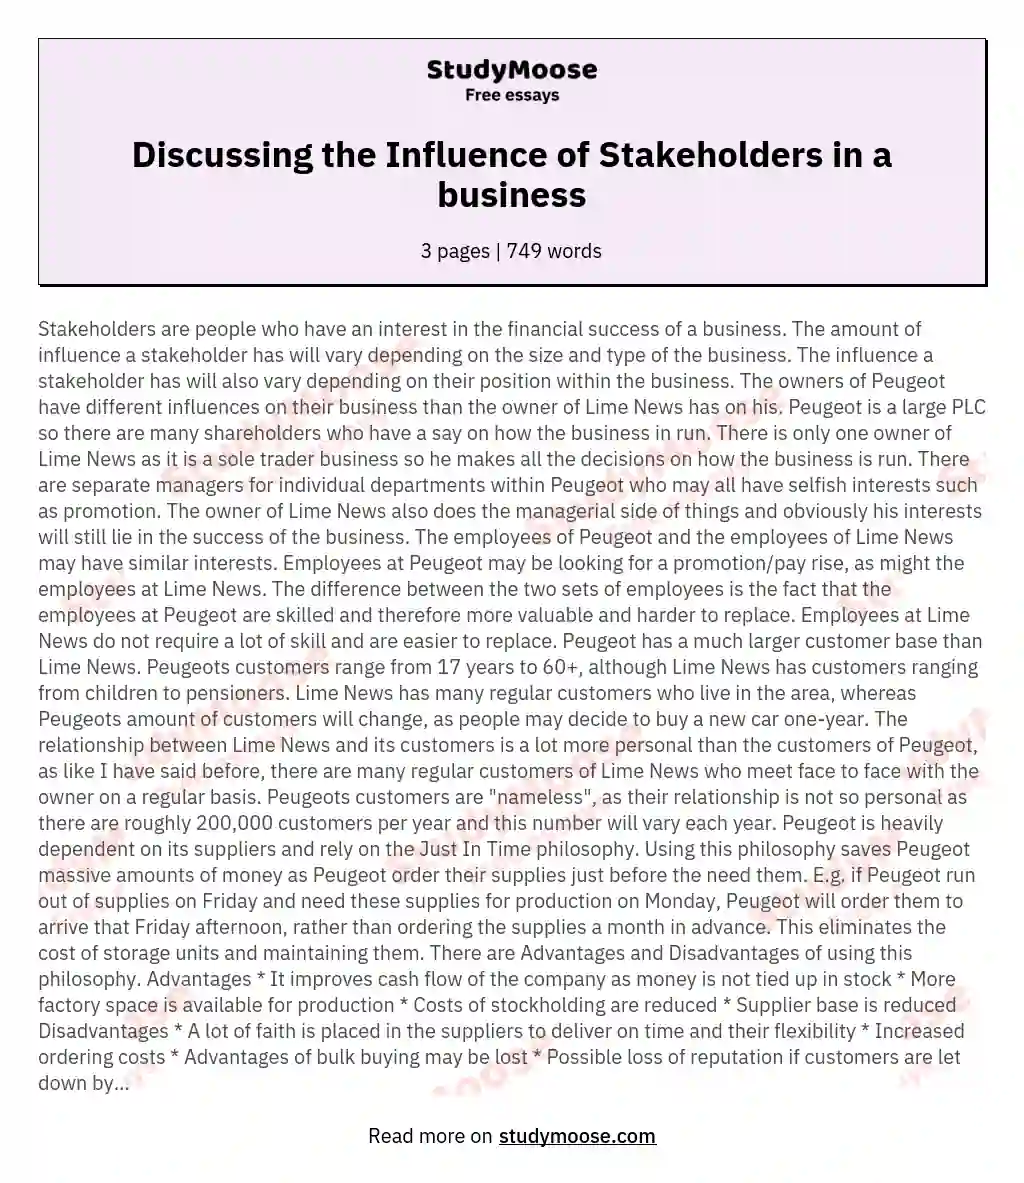 Discussing the Influence of Stakeholders in a business essay